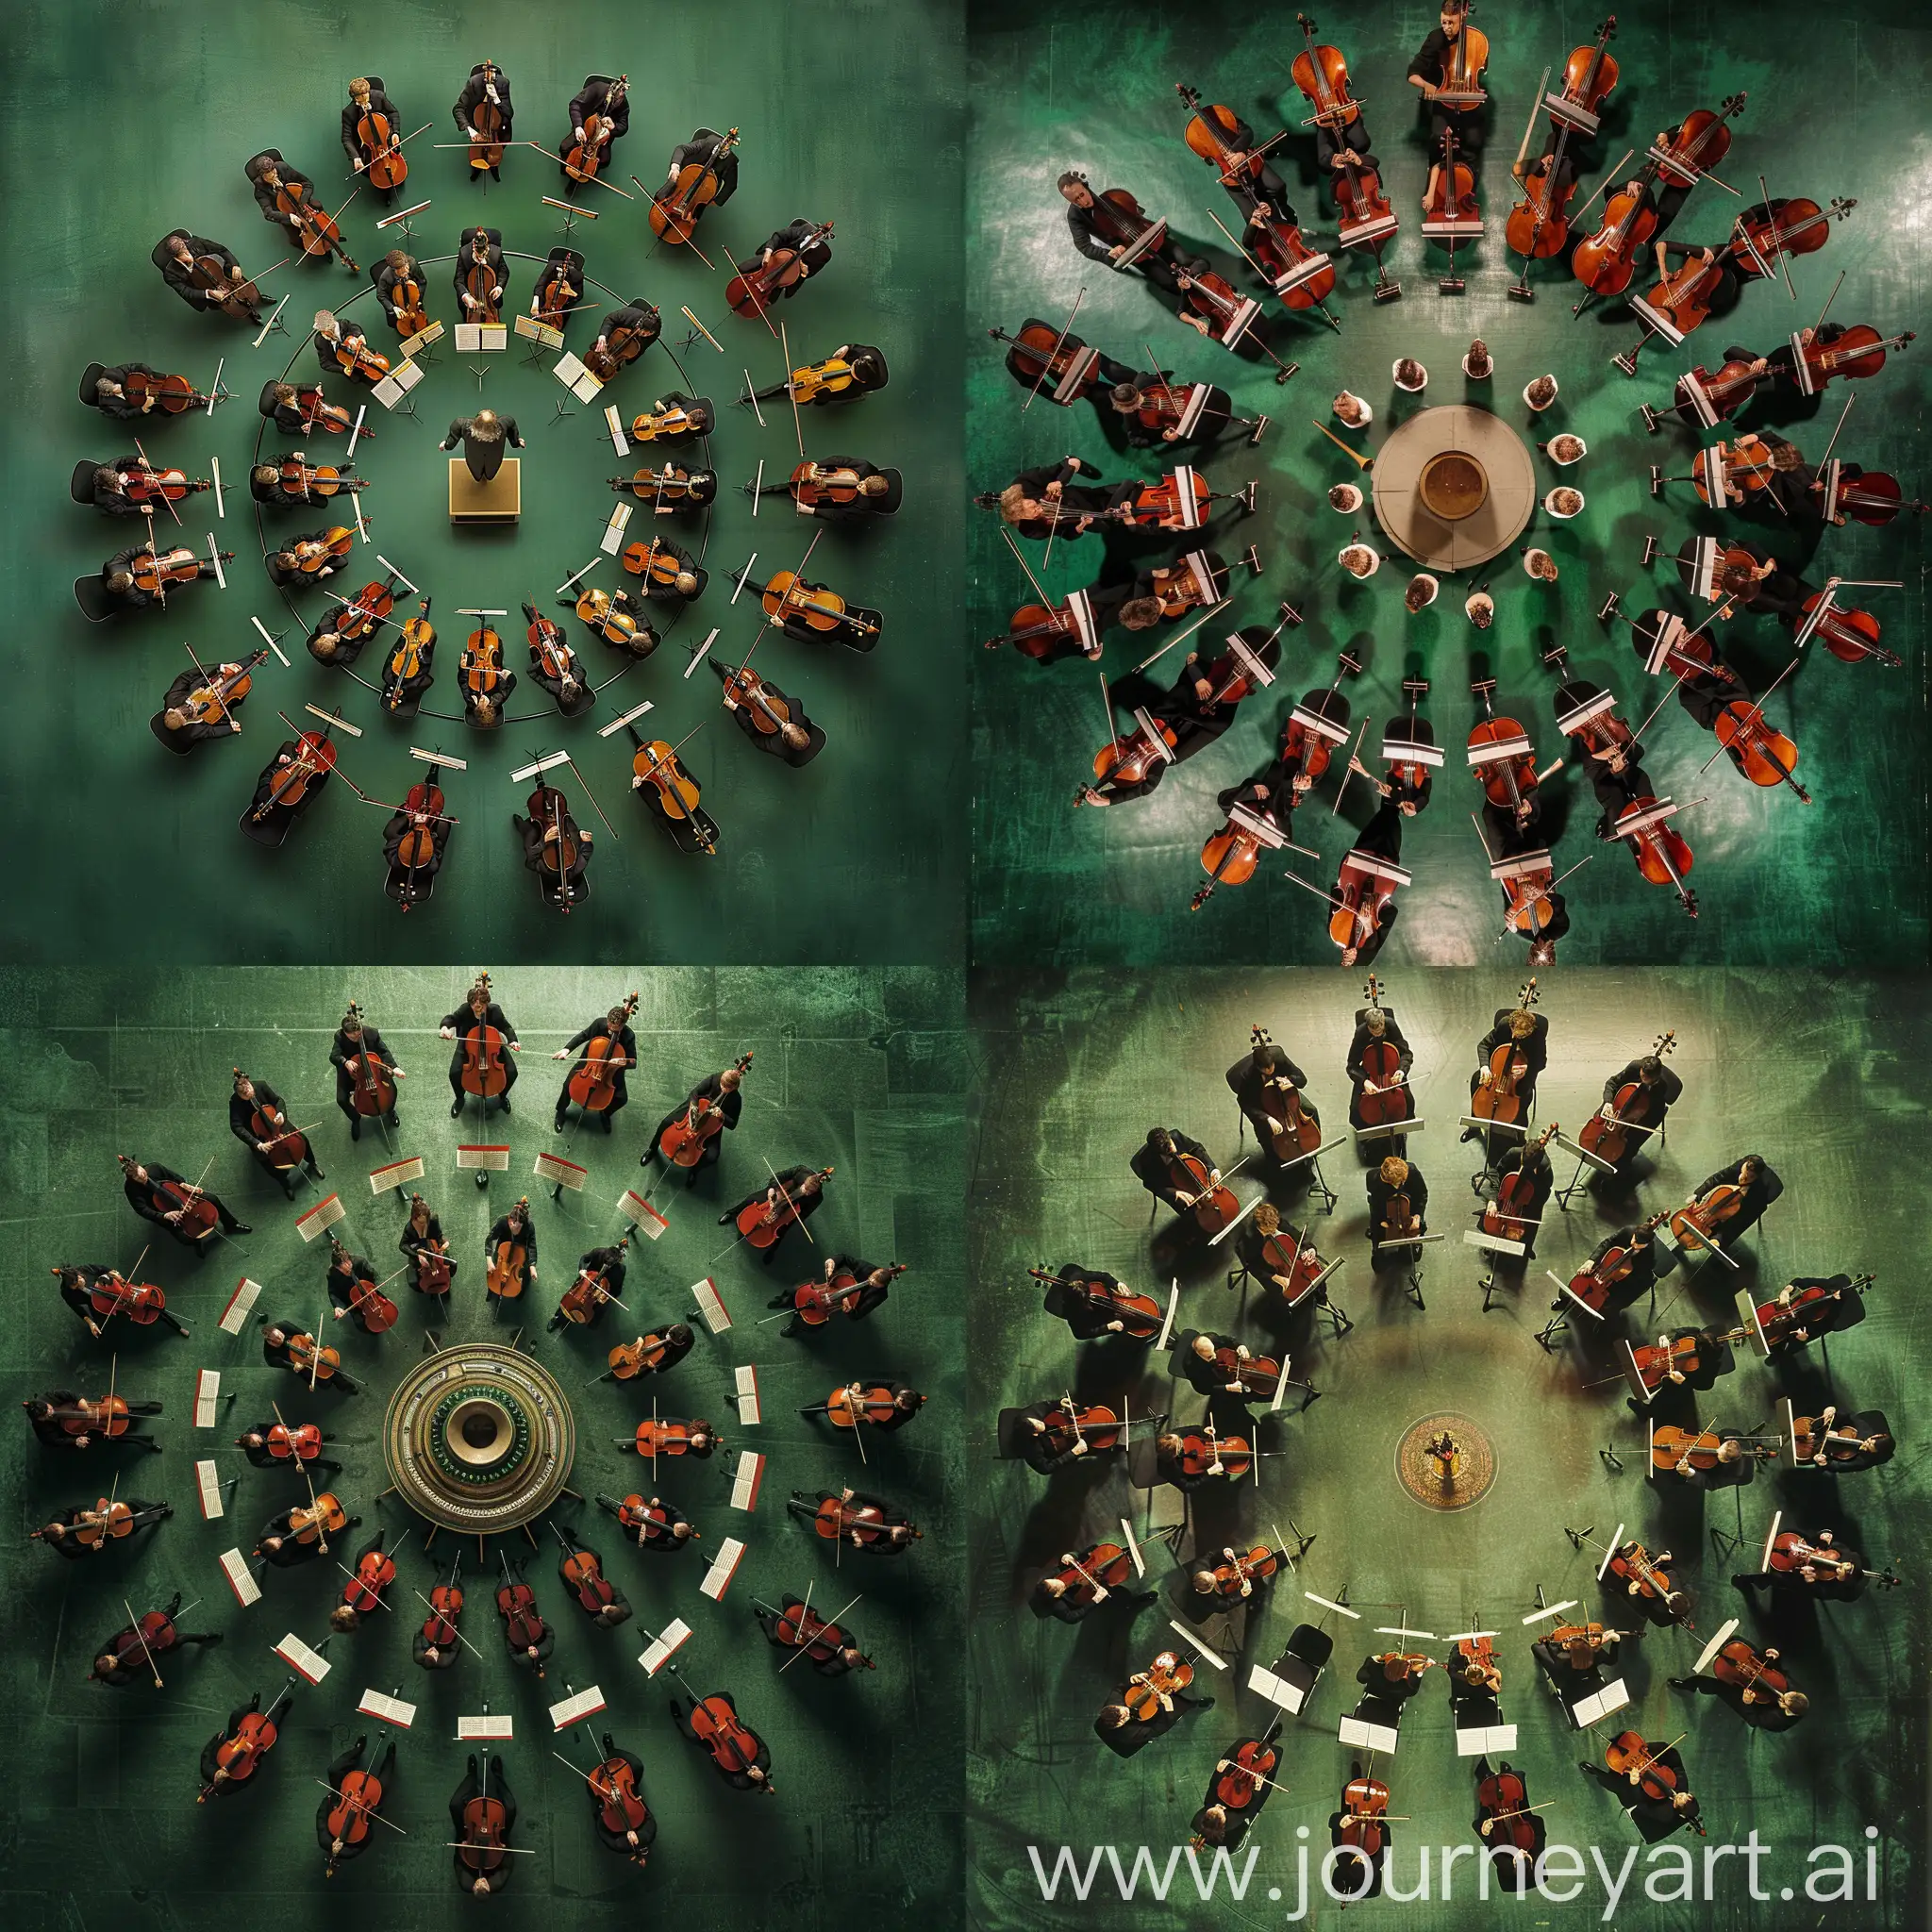 Circular-Orchestra-Seated-with-Green-Background